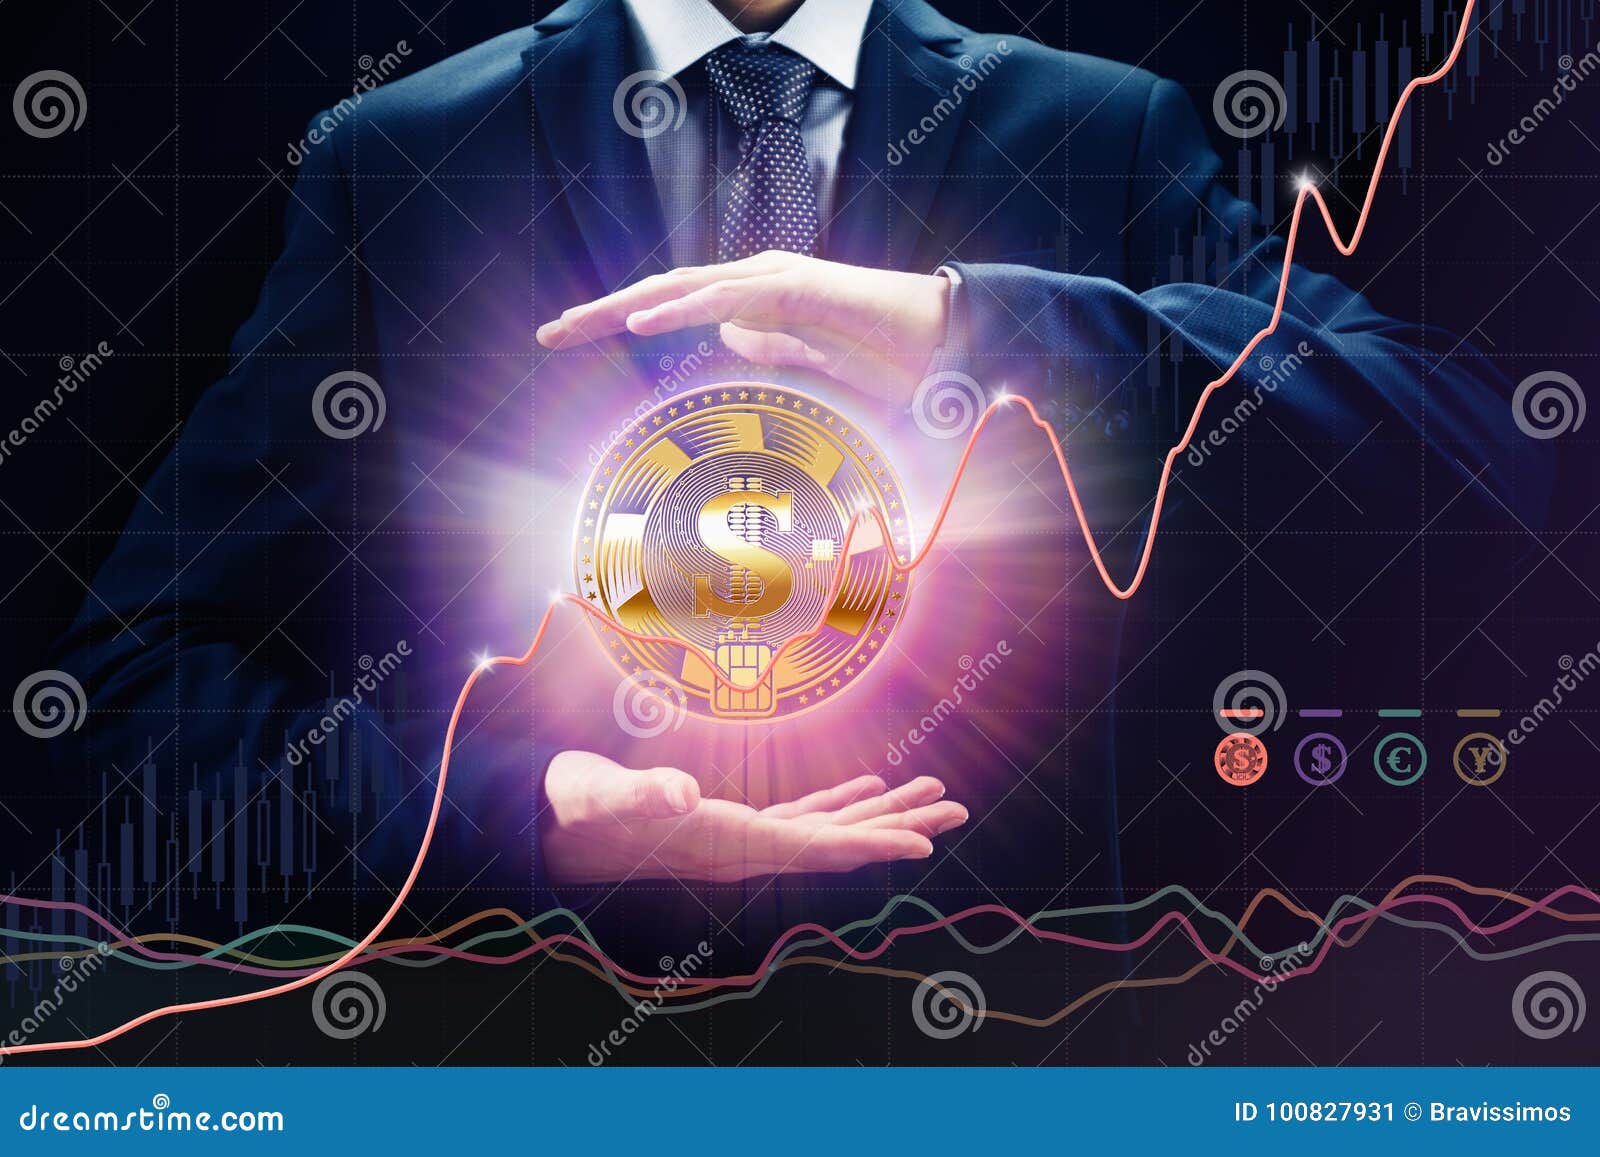 buy coin crypto currency exchange